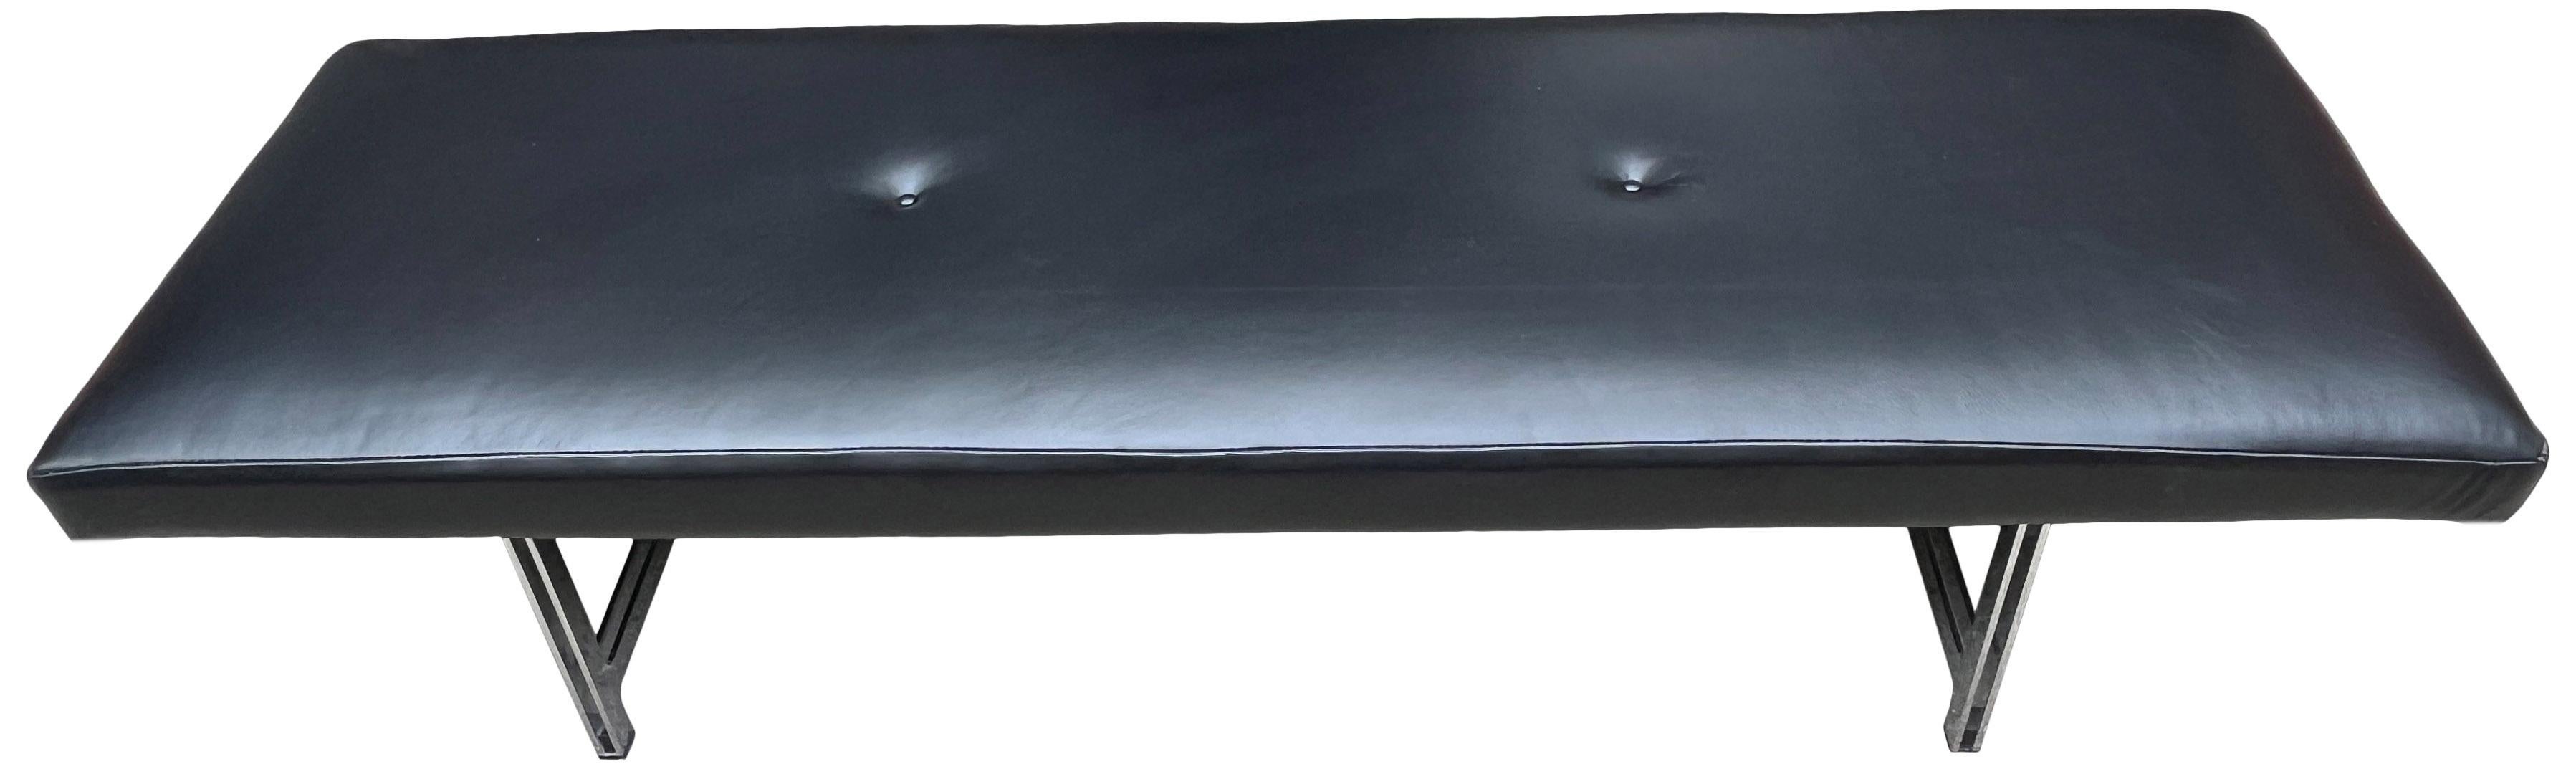 Walter Knoll Bench in Black Leather Crome Base  3